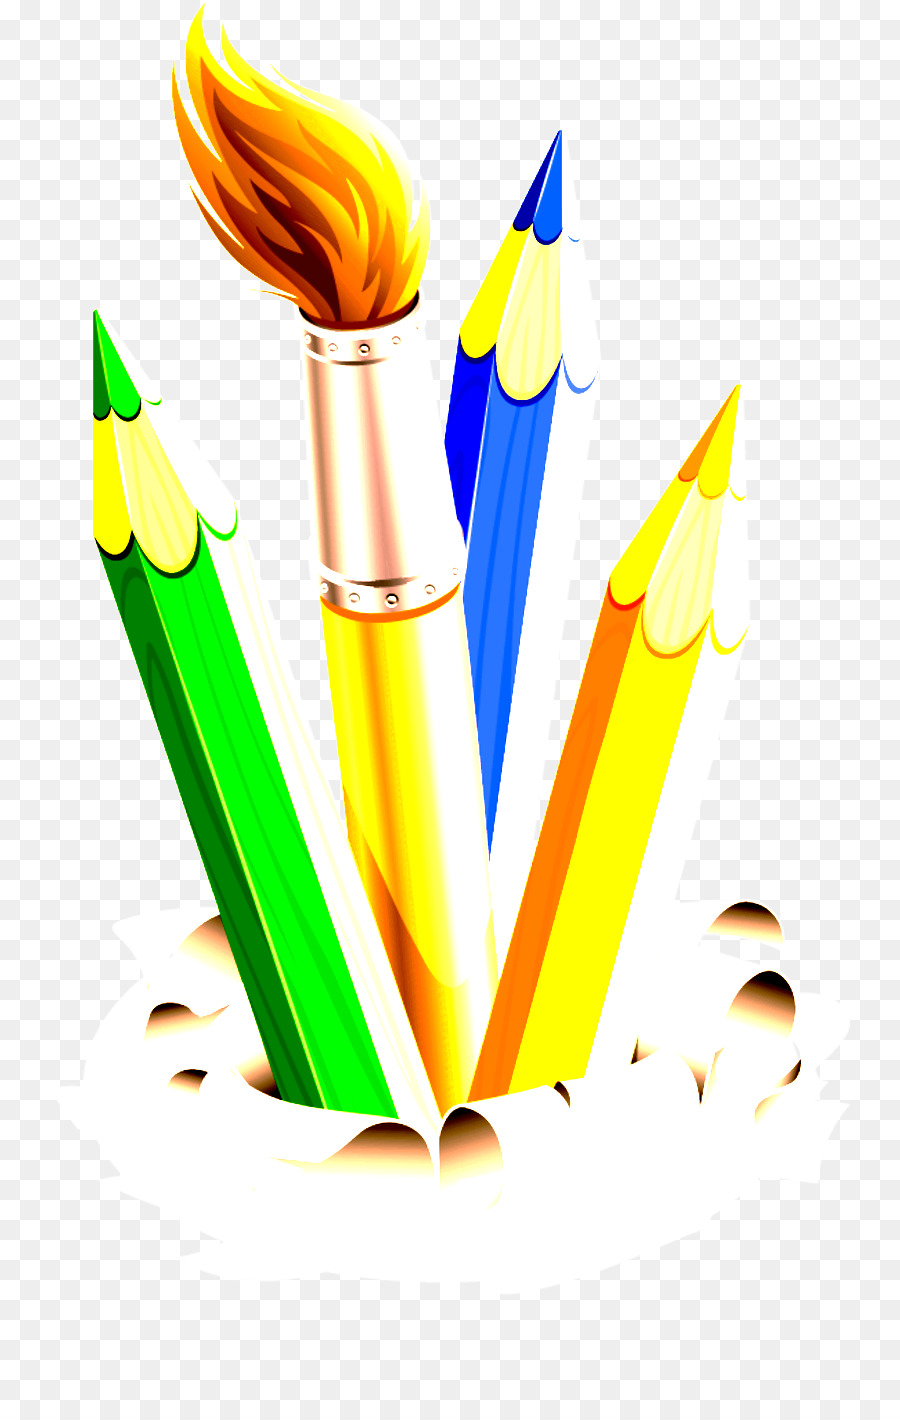 yellow graphic design clip art pencil writing implement